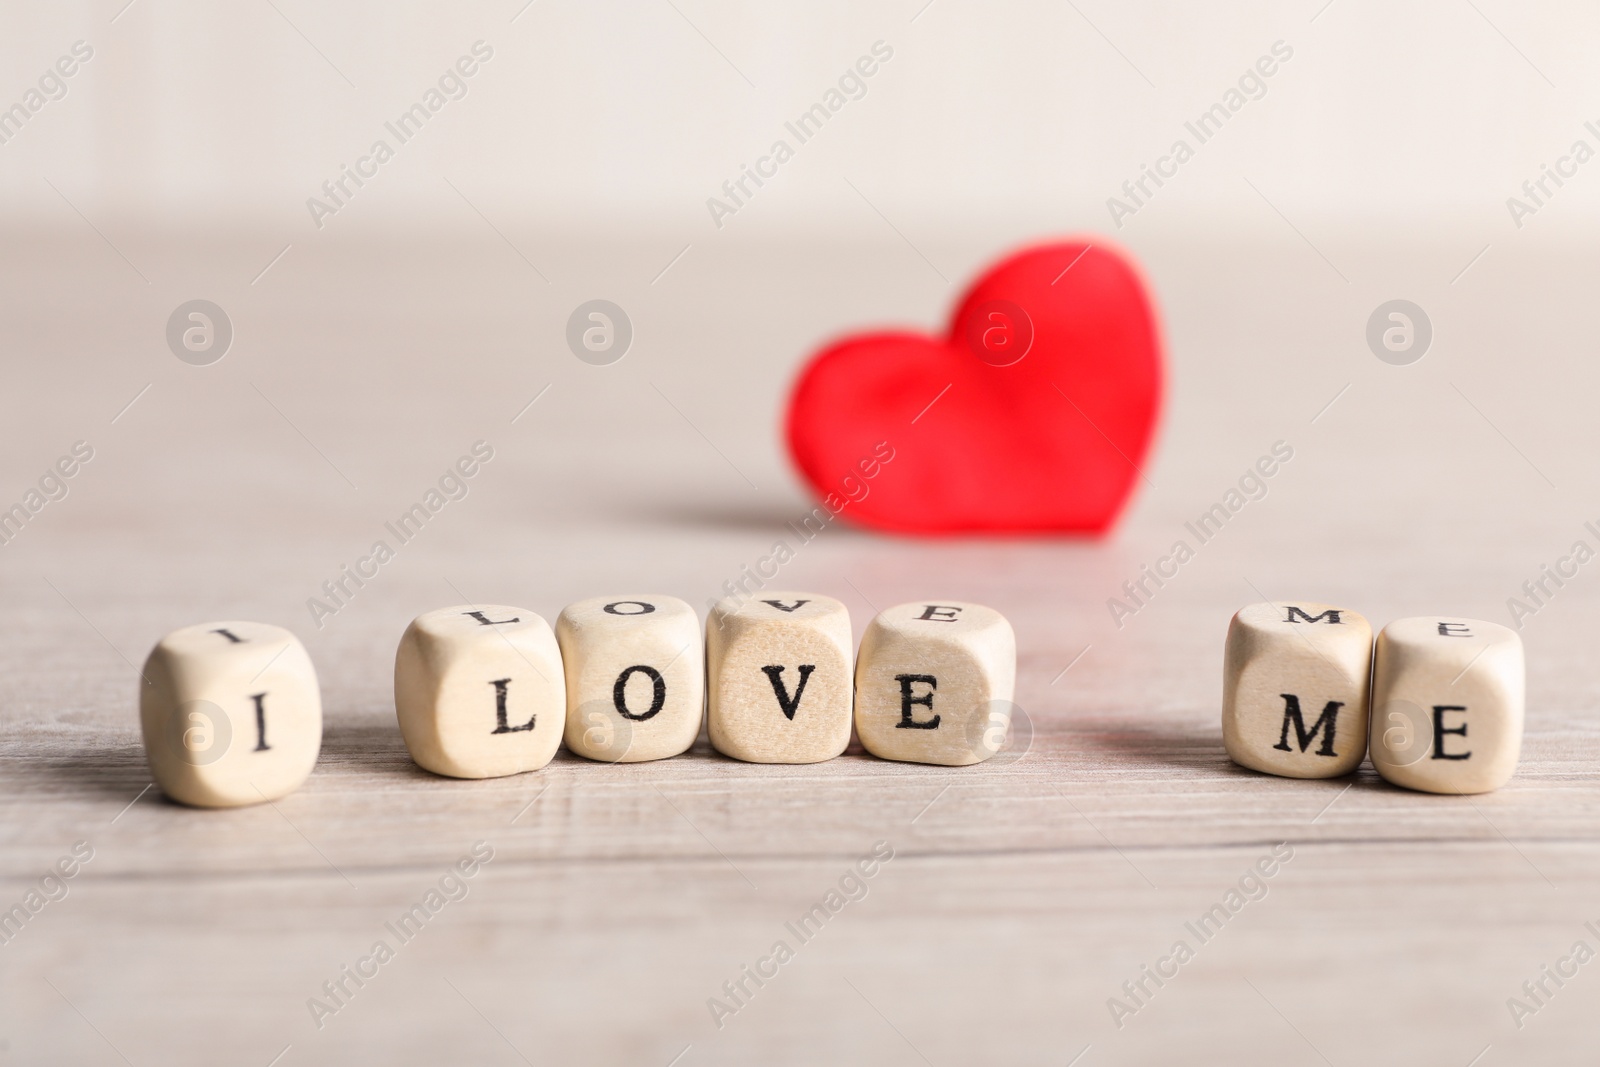 Photo of Phrase I Love Me made of small cubes on white table